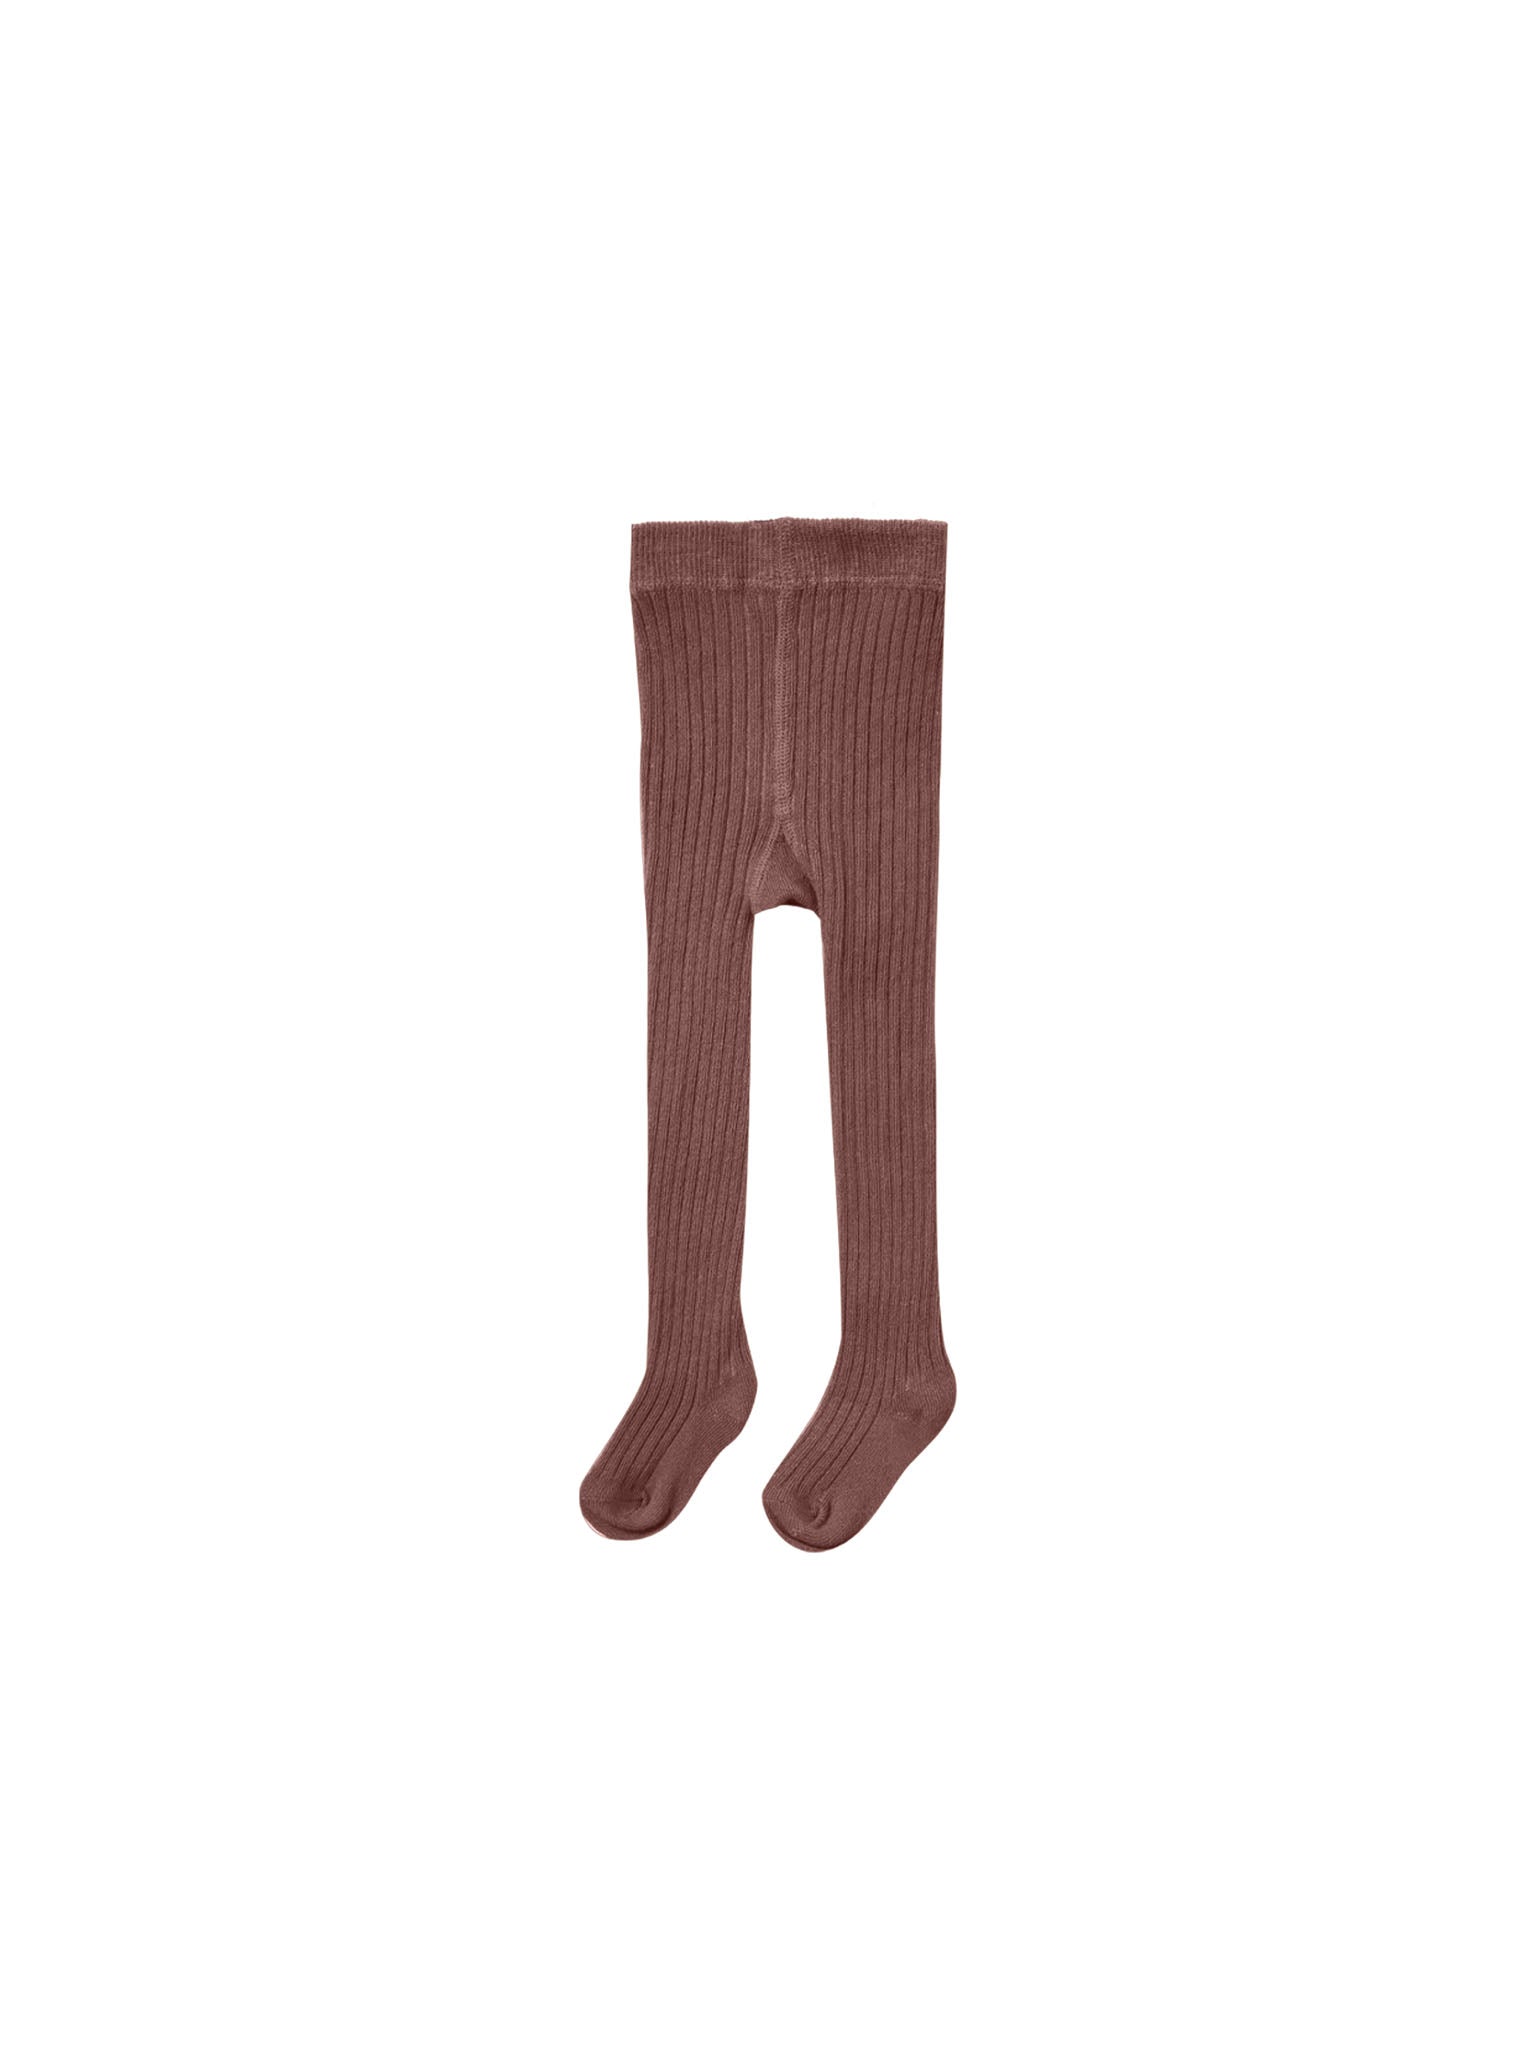 QUINCY MAE TIGHTS / PLUM